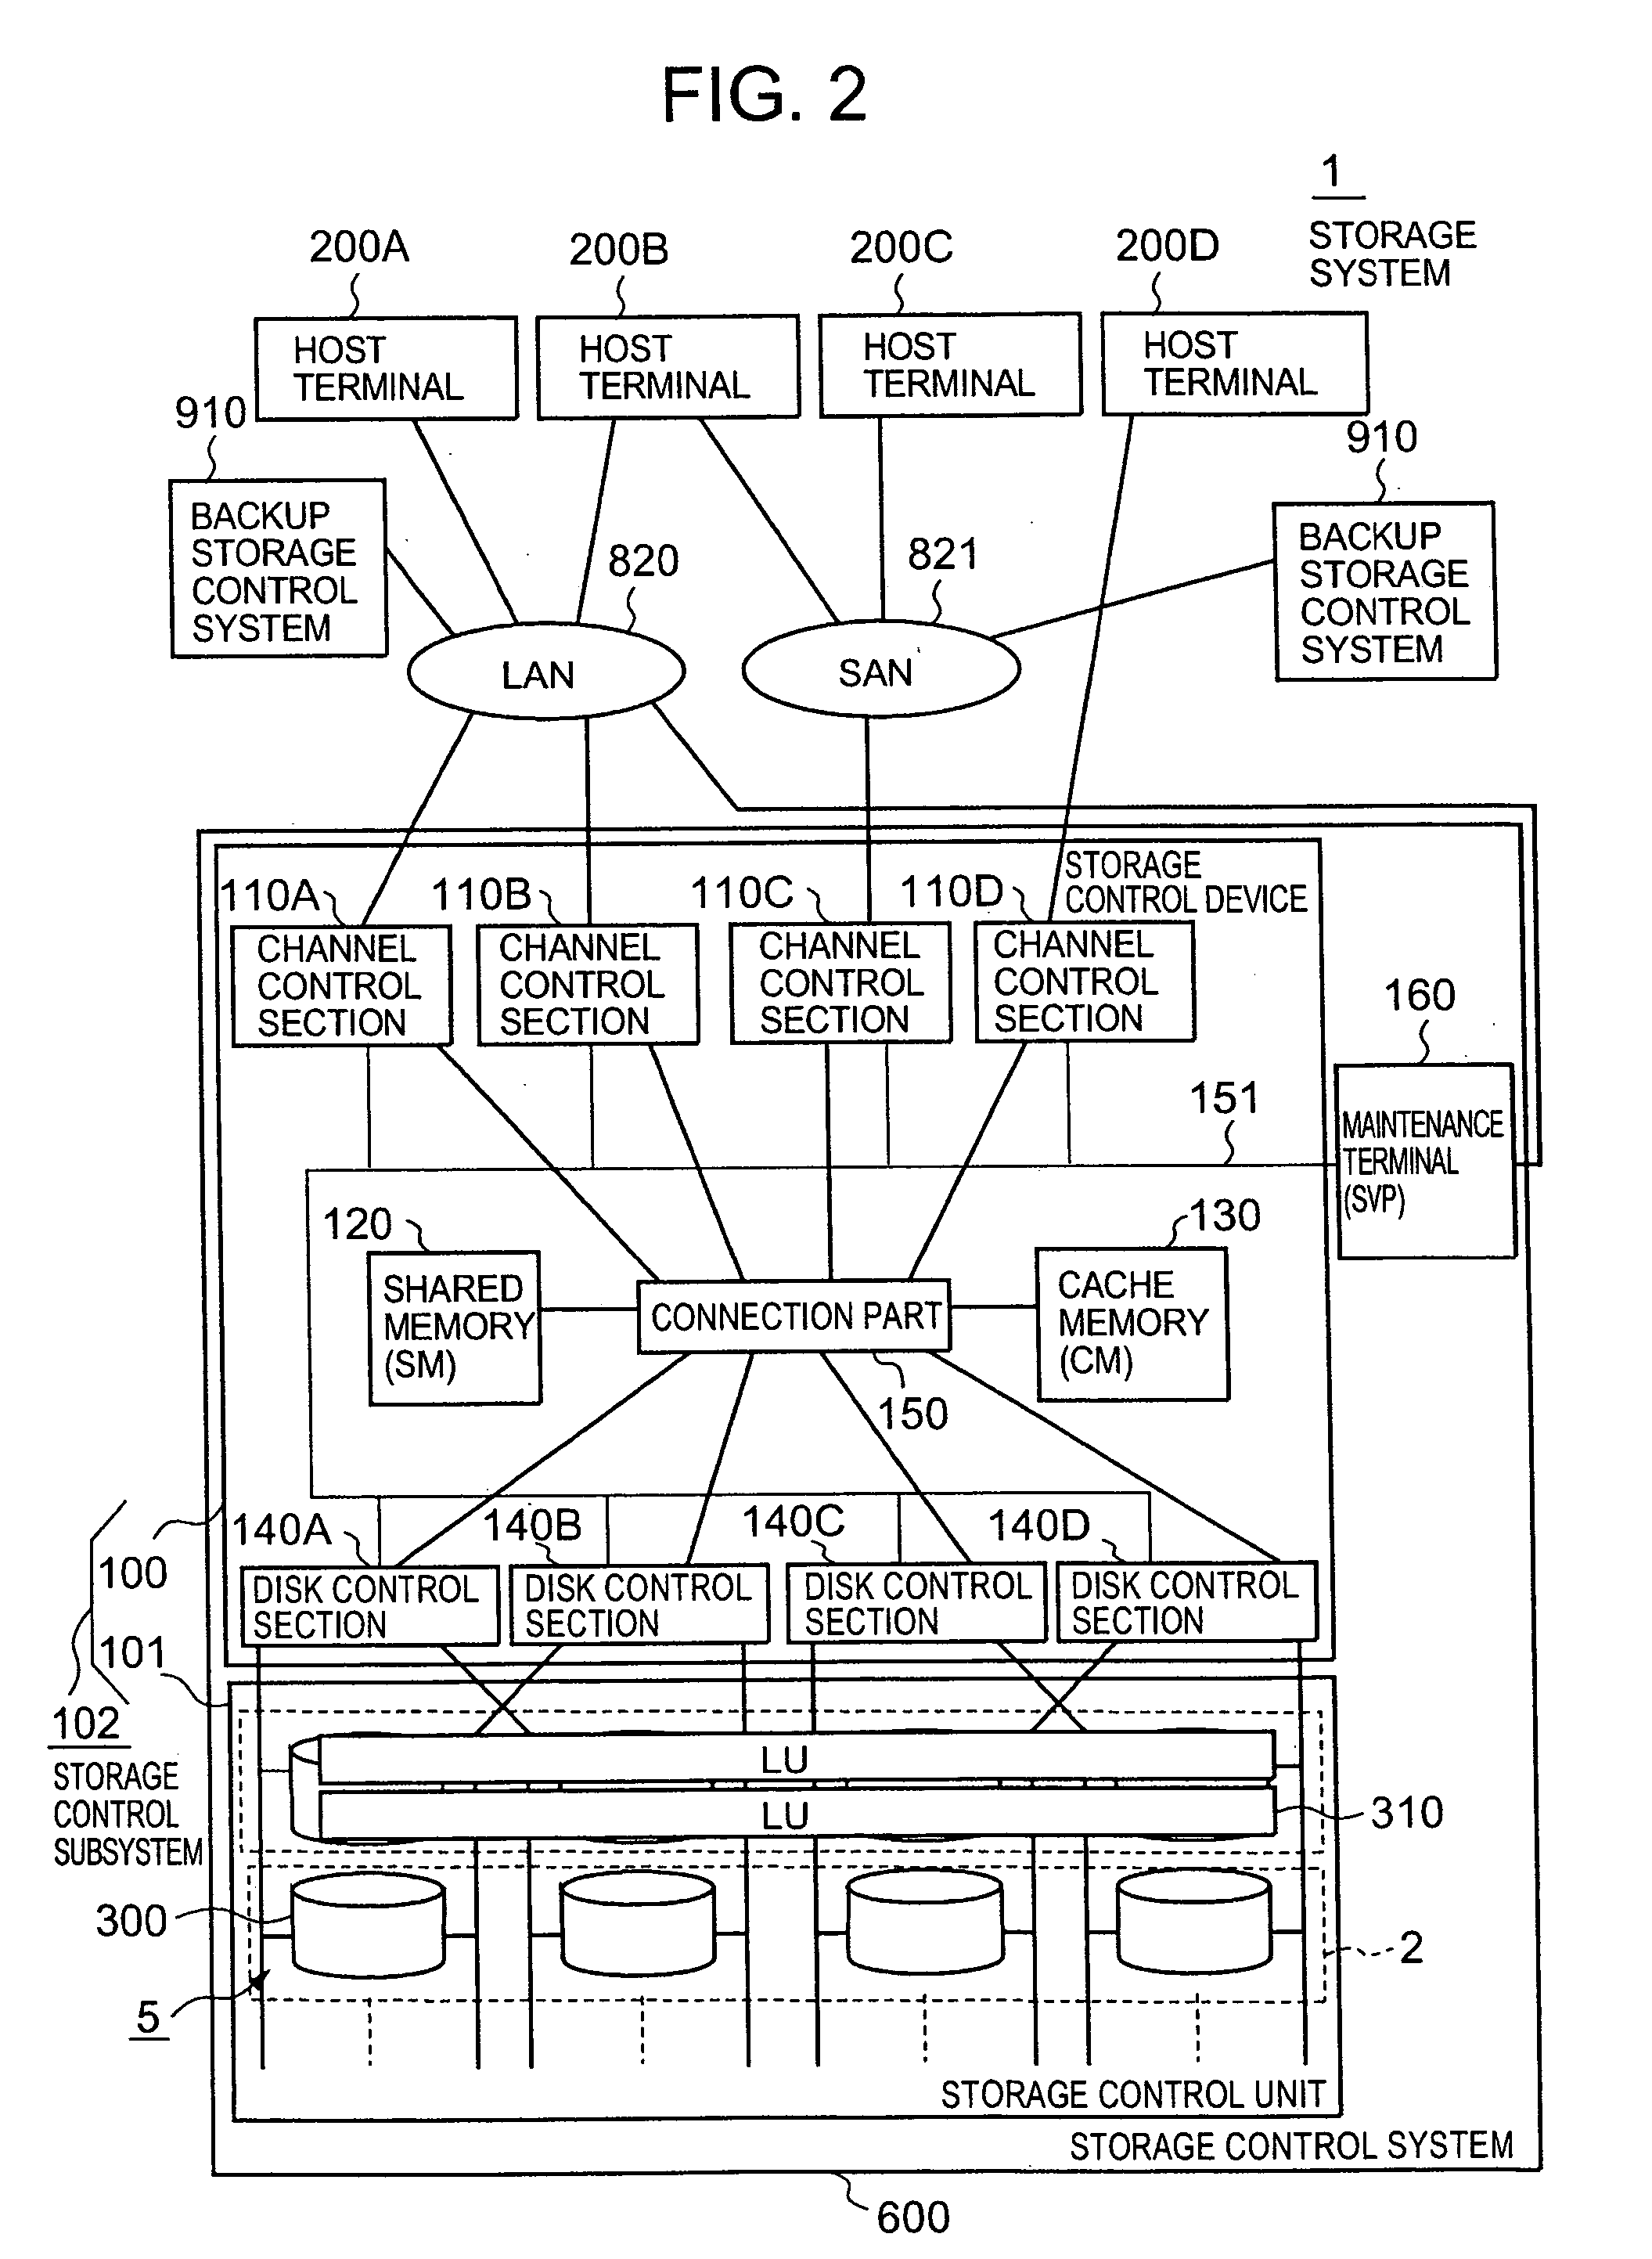 Temporary storage control system and method for installing firmware in disk type storage device belonging to storage control system